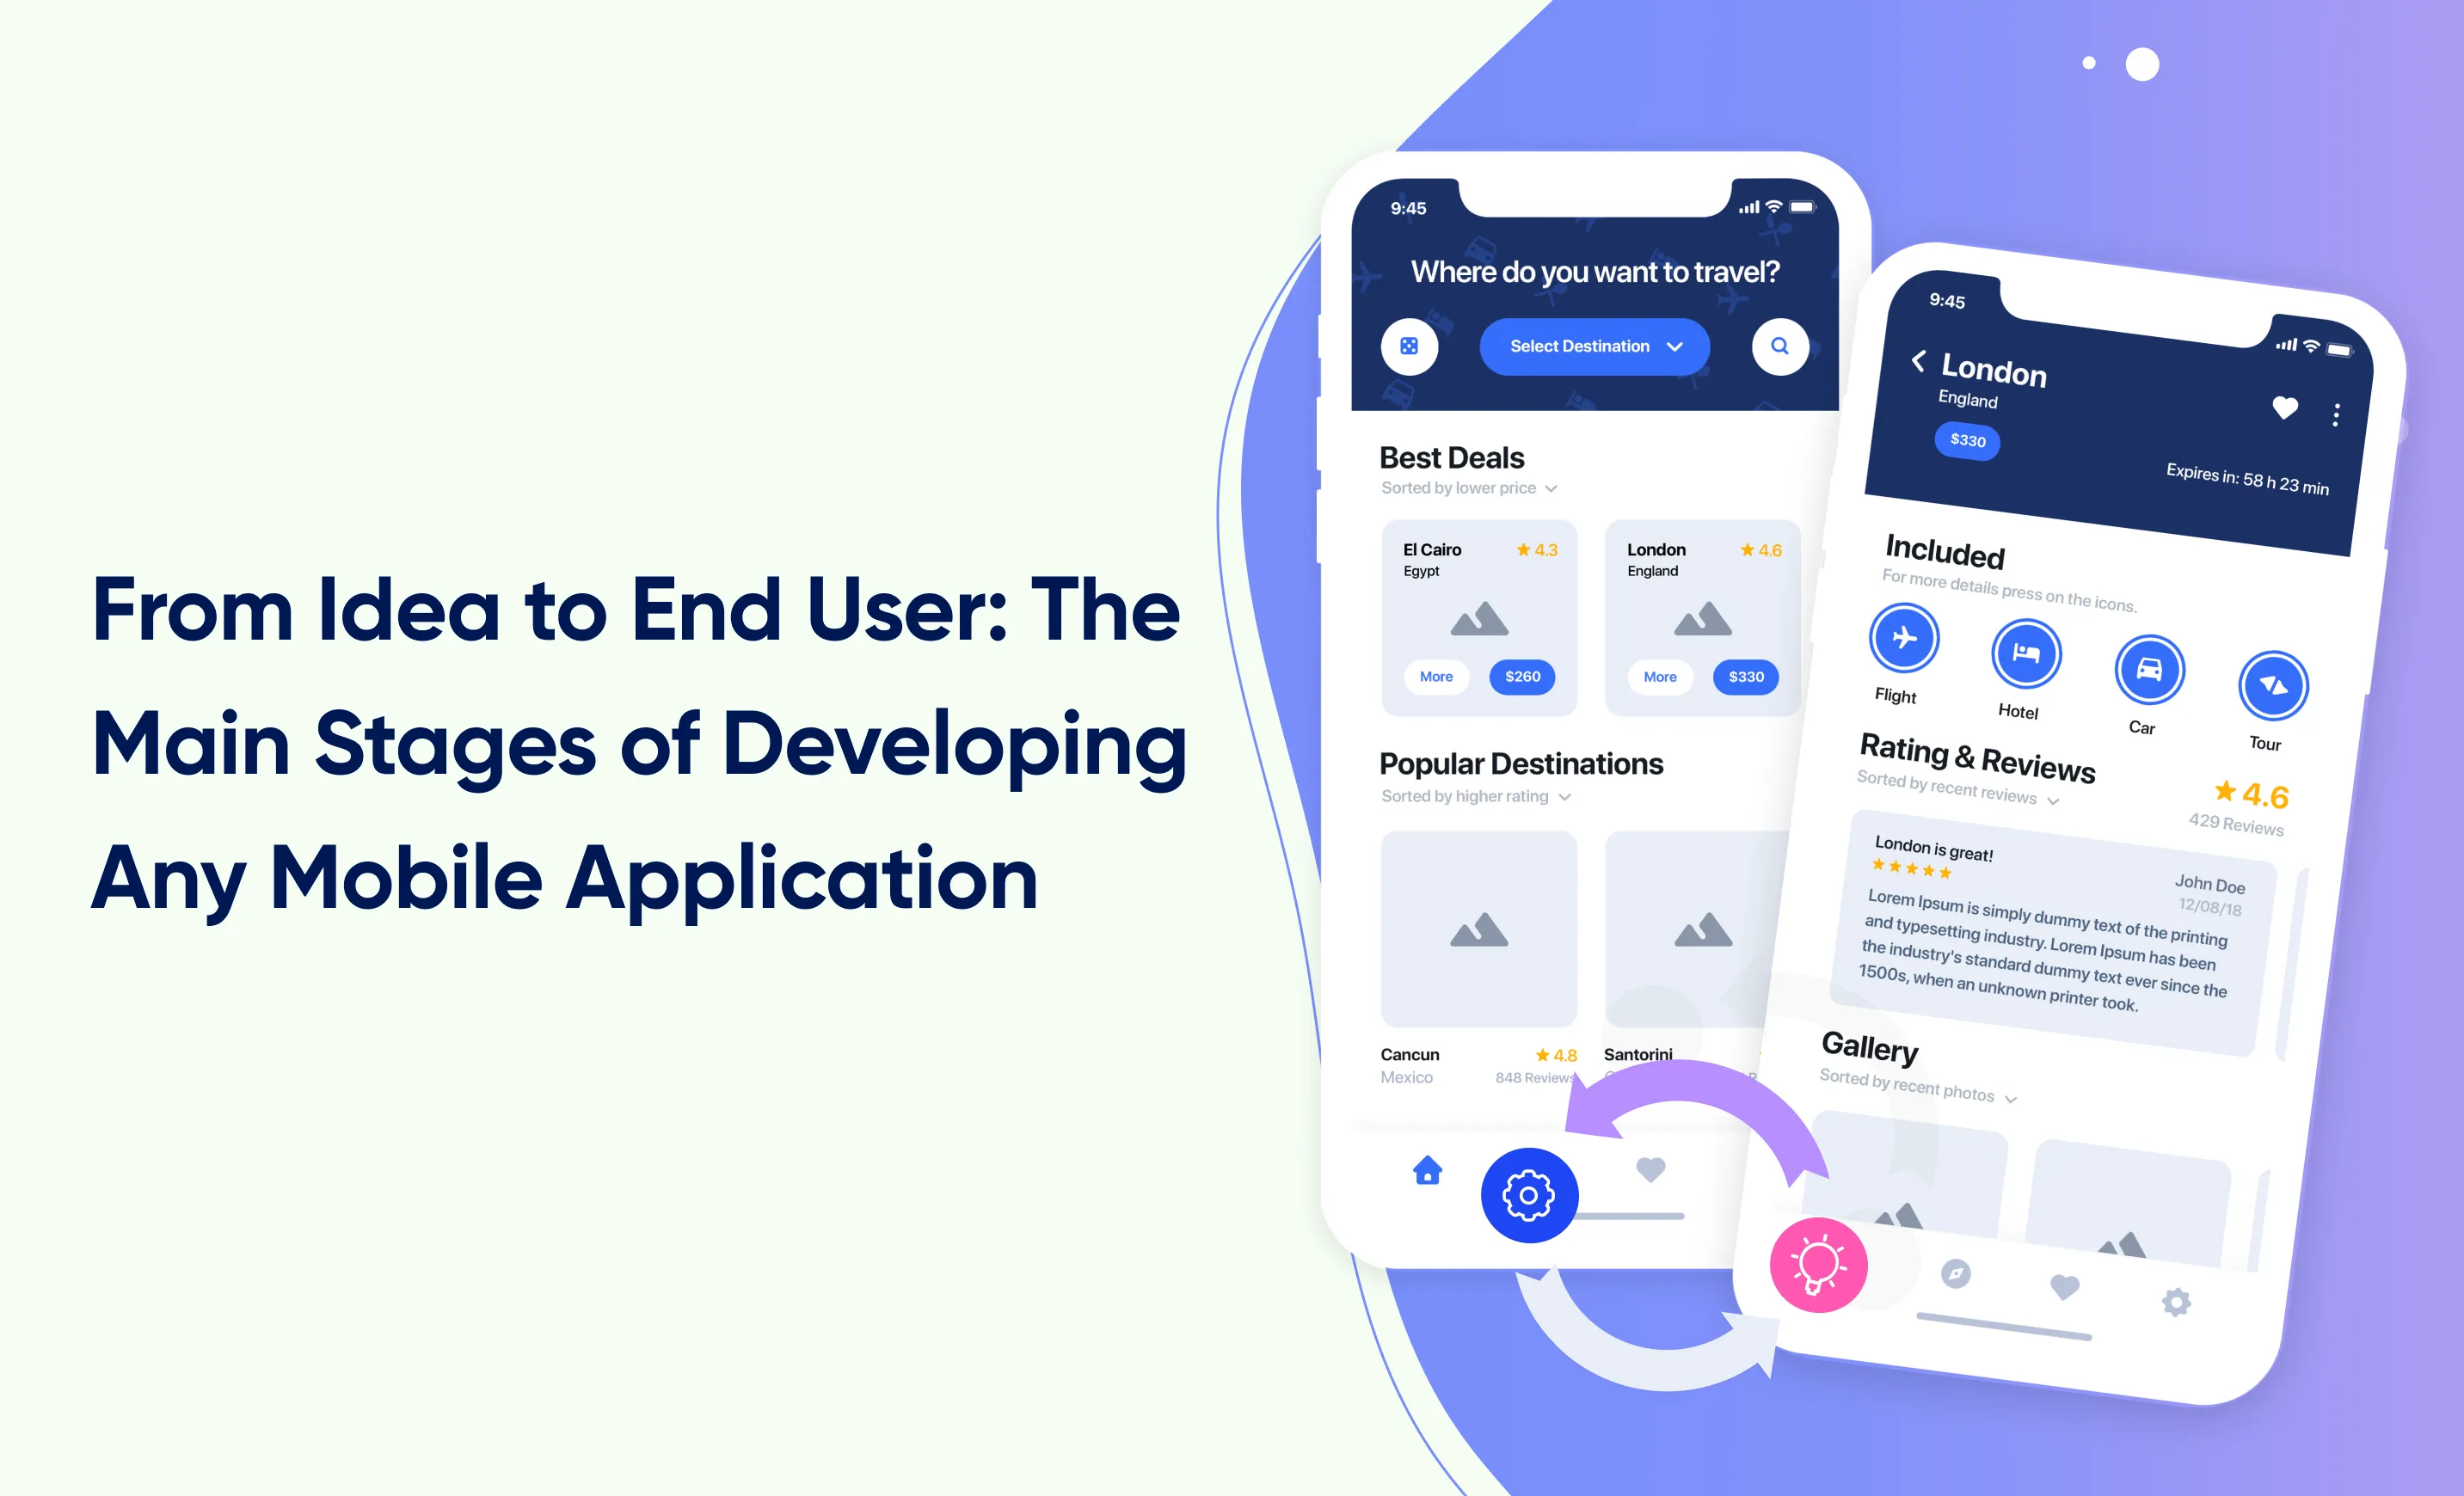 From Idea to End User: The Main Stages of Developing Any Mobile Application